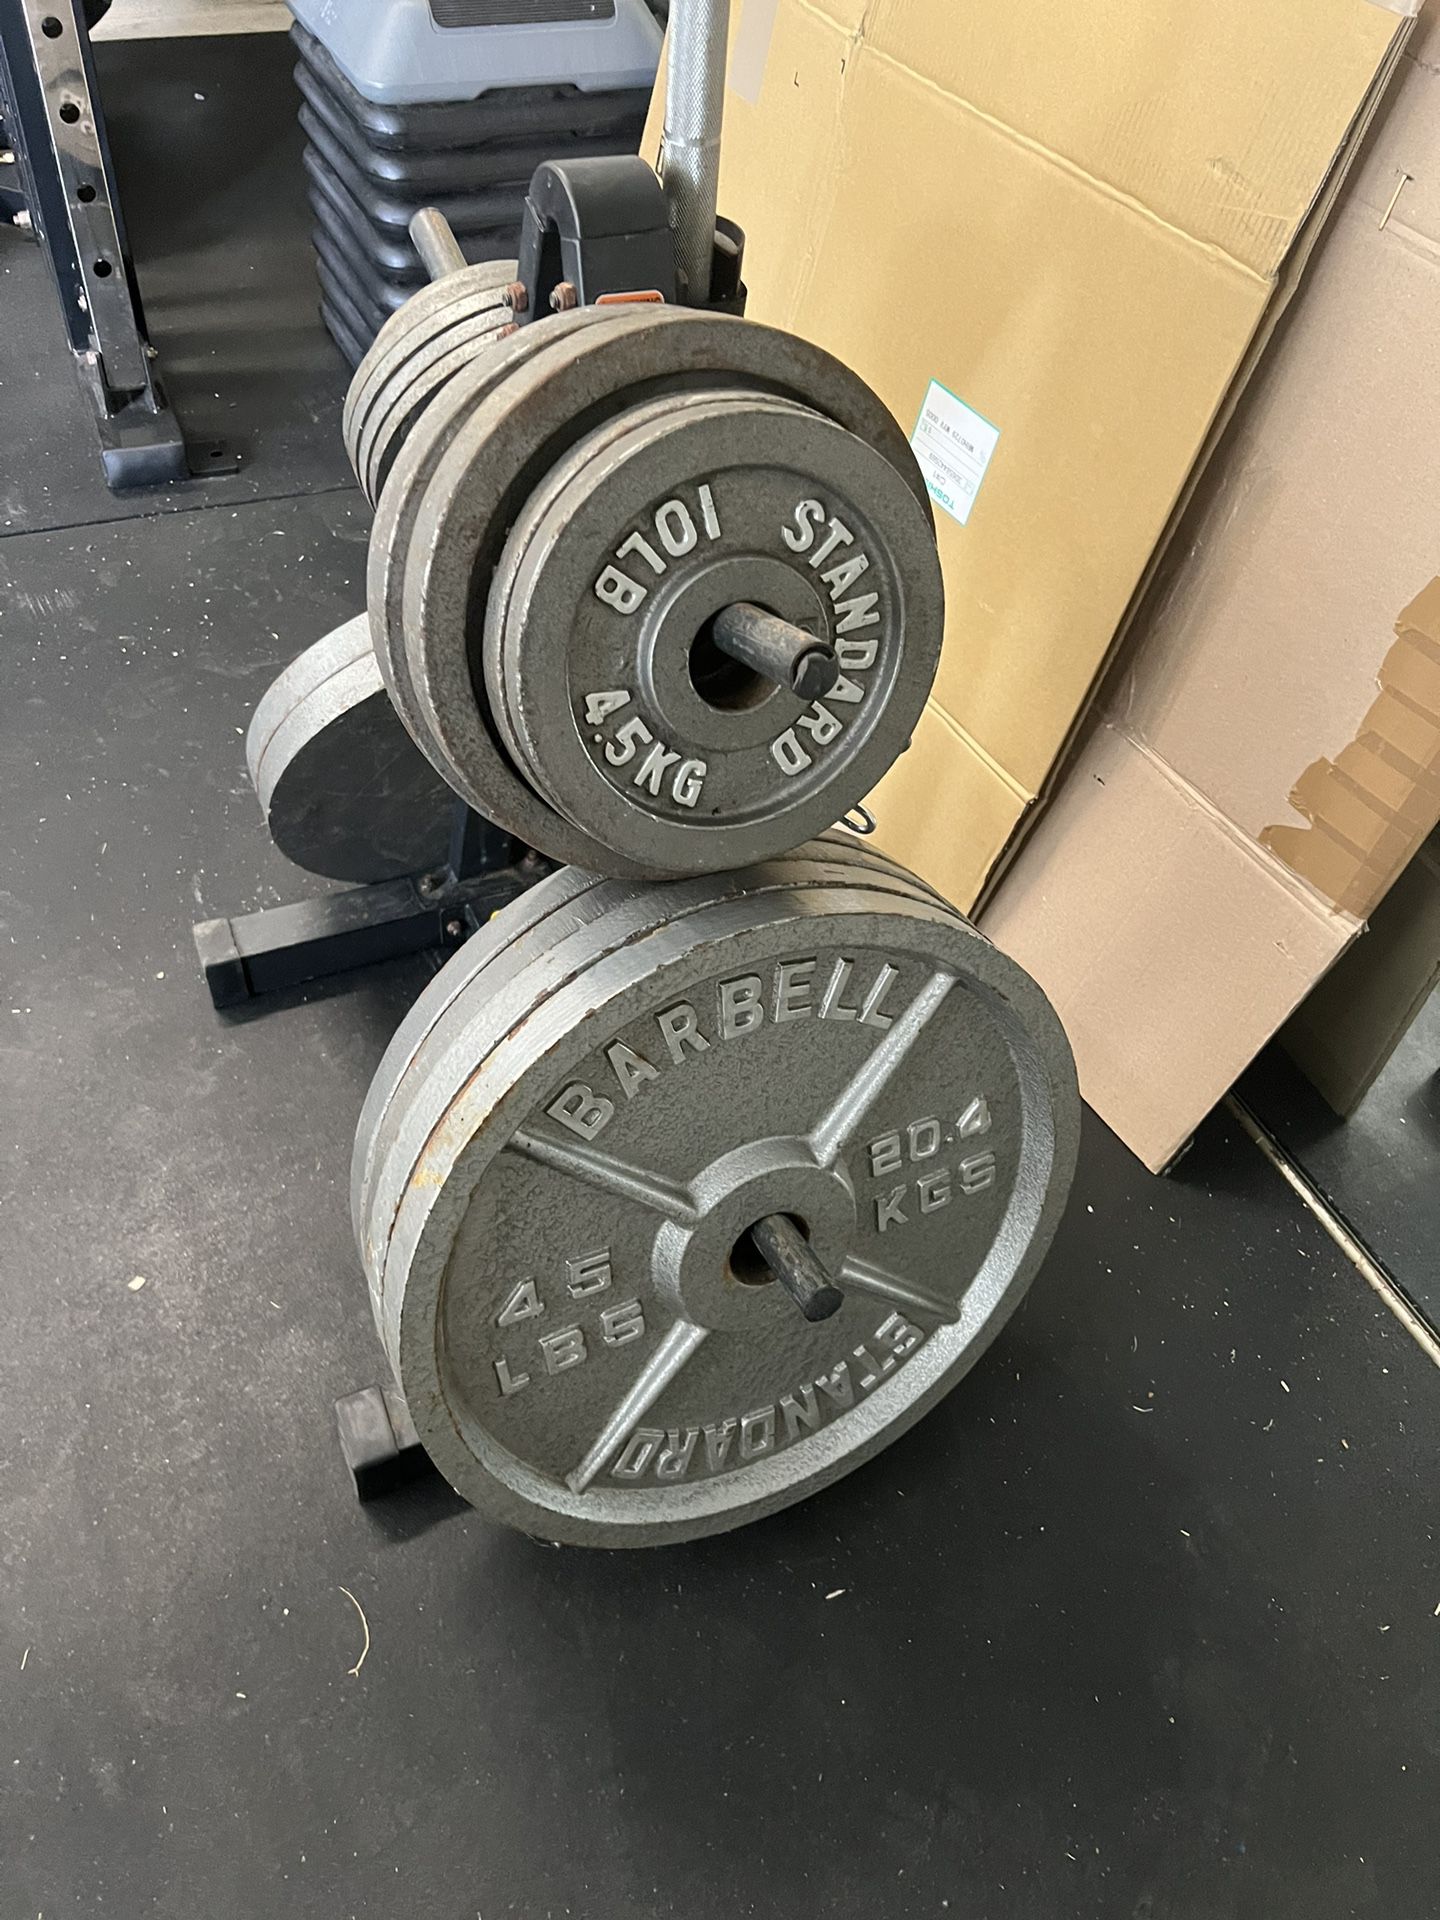 Weights For Weight Bench- Barbell And Weight Stand 